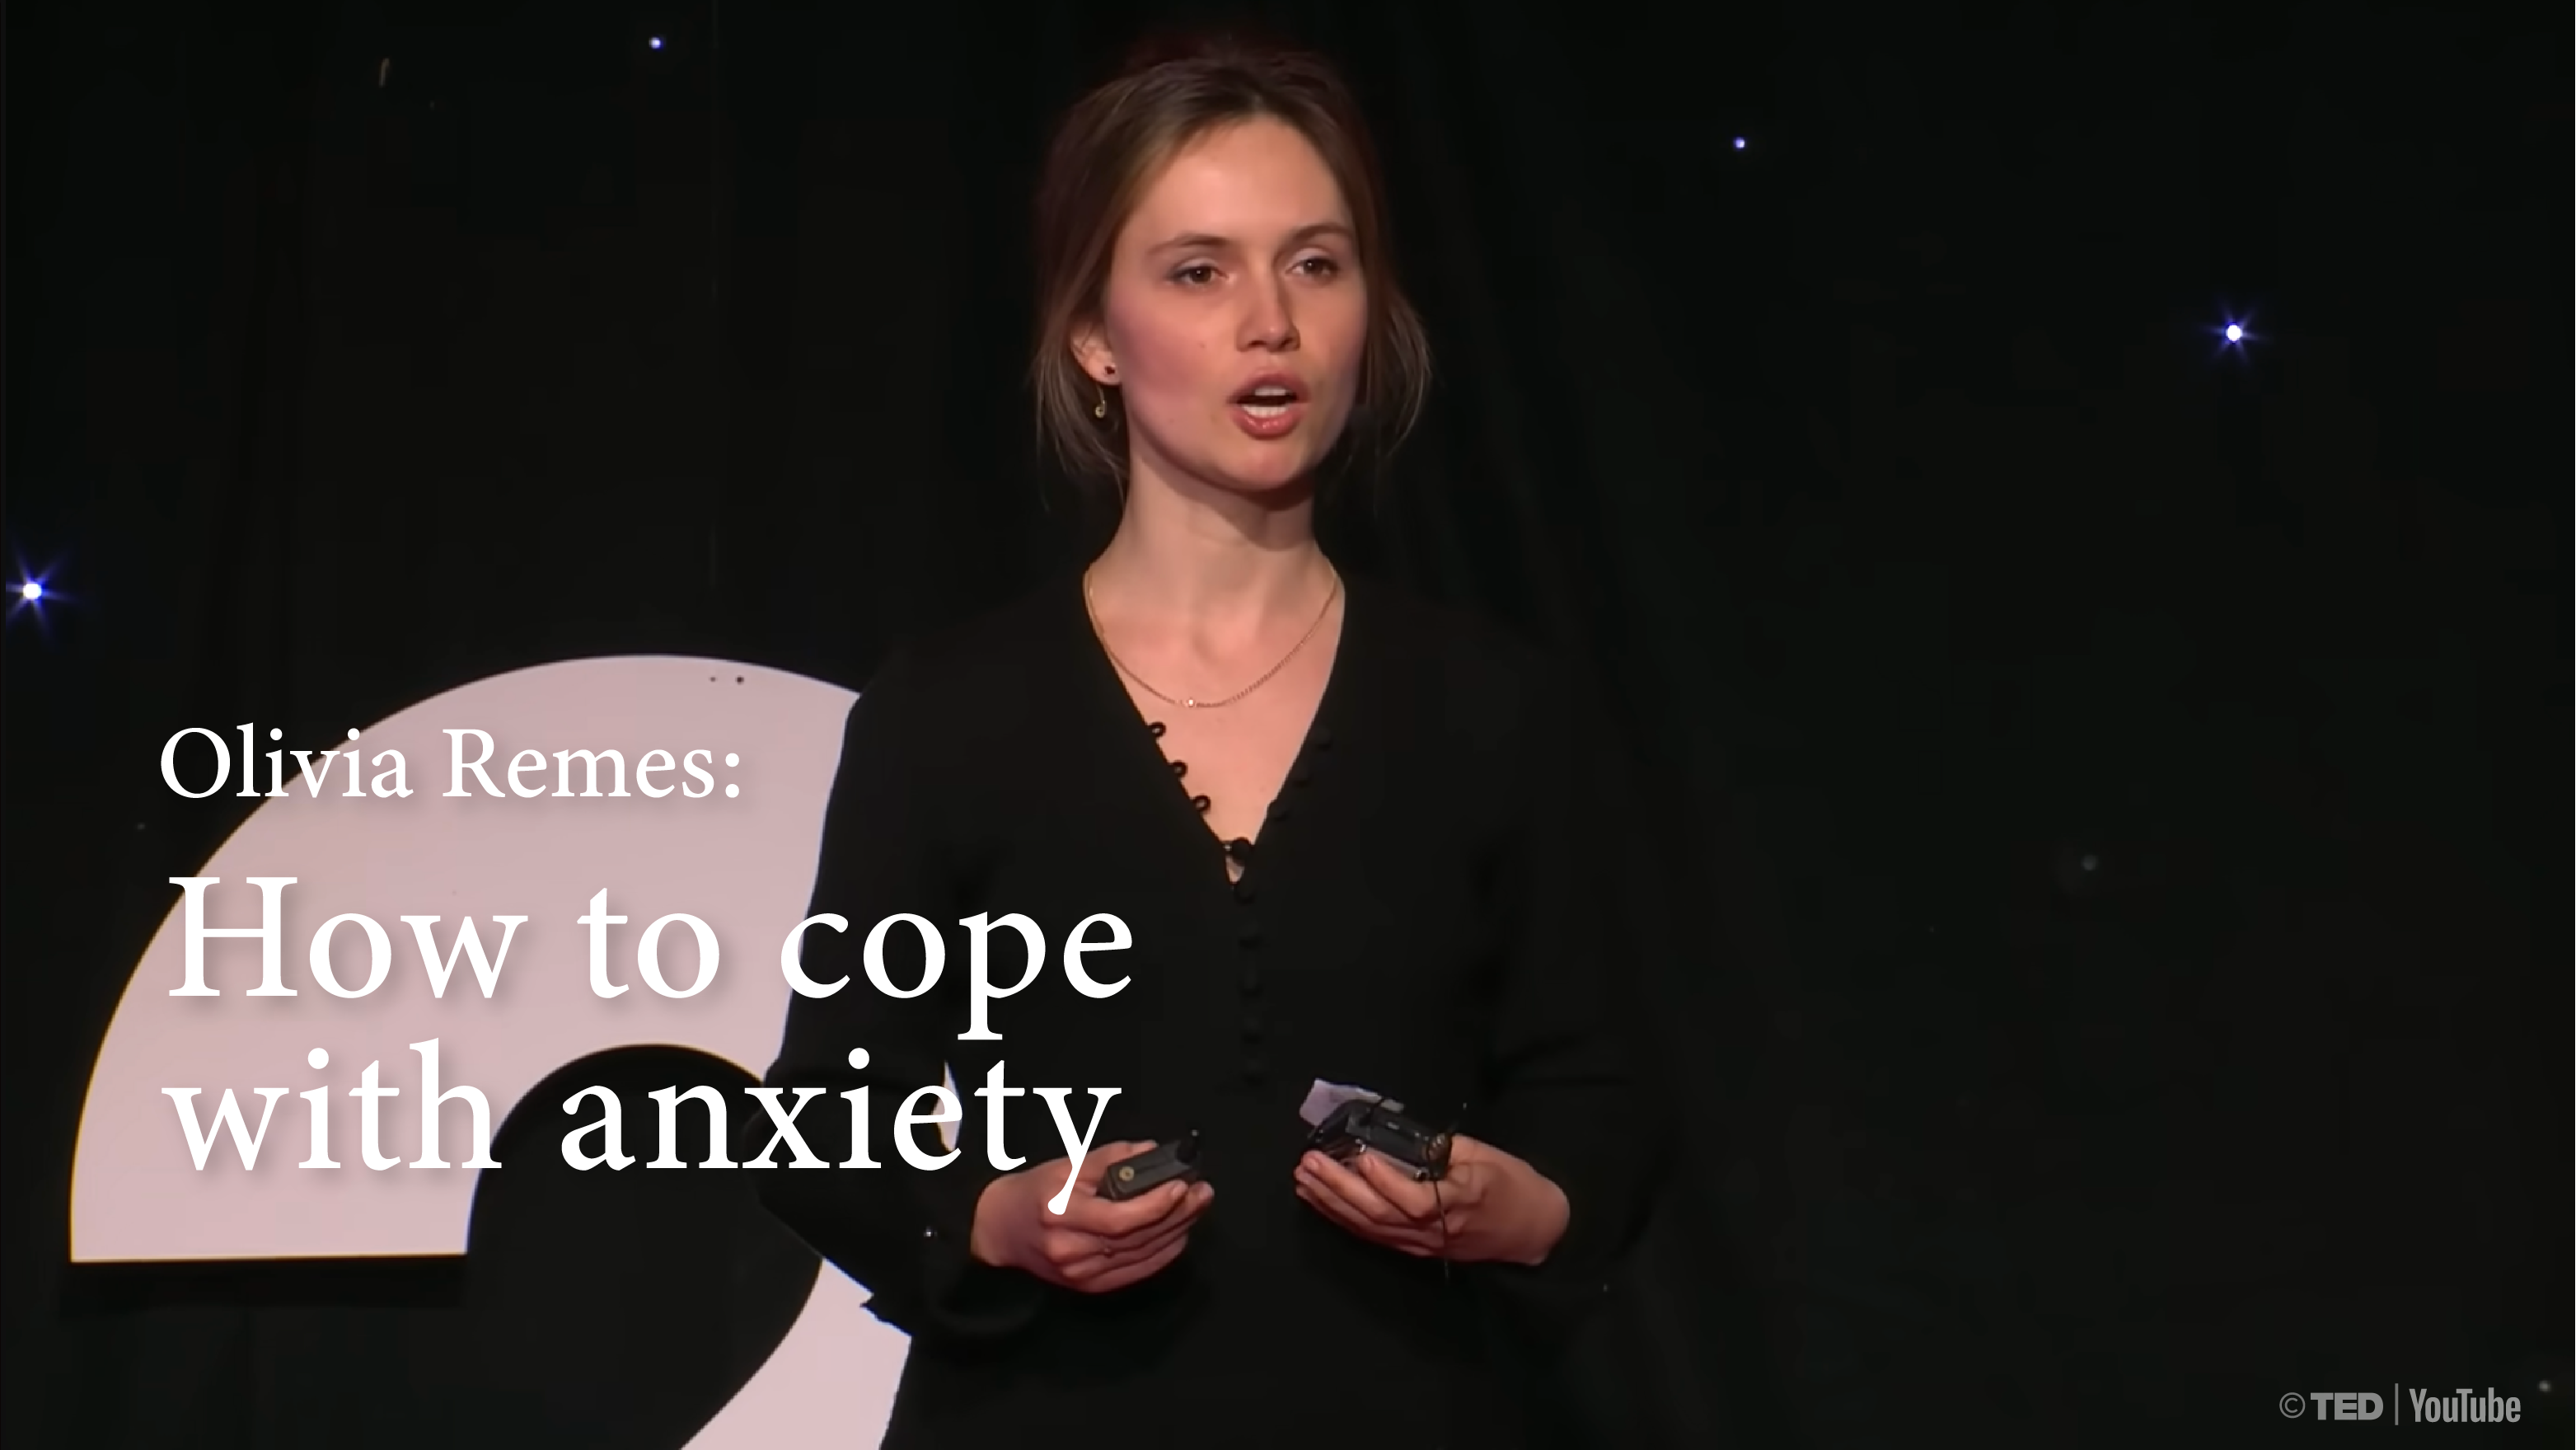 [B] How to cope with anxiety | Olivia Remes [FULL]